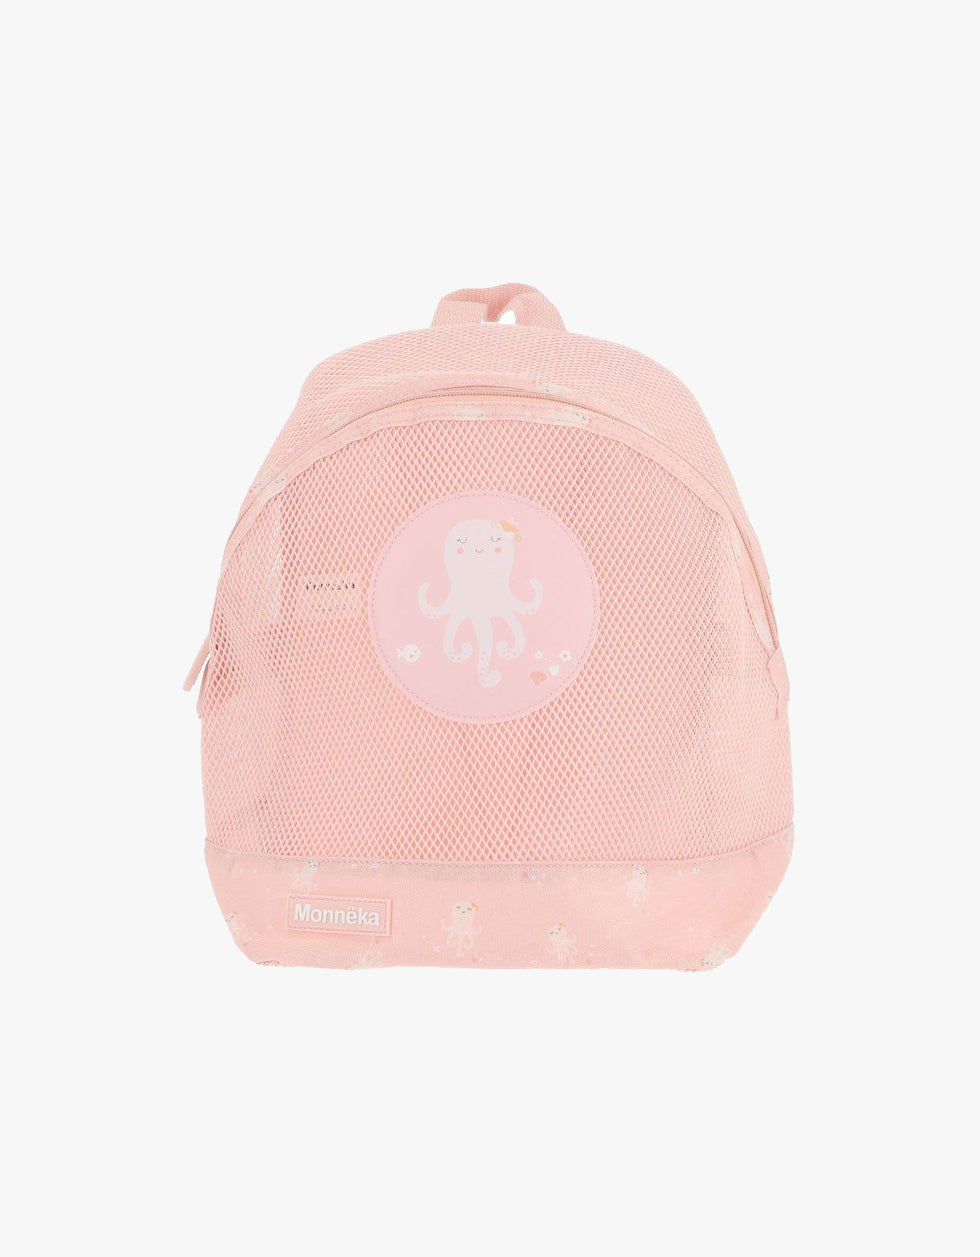 Anti-sand Backpack | Jolie The Octopus